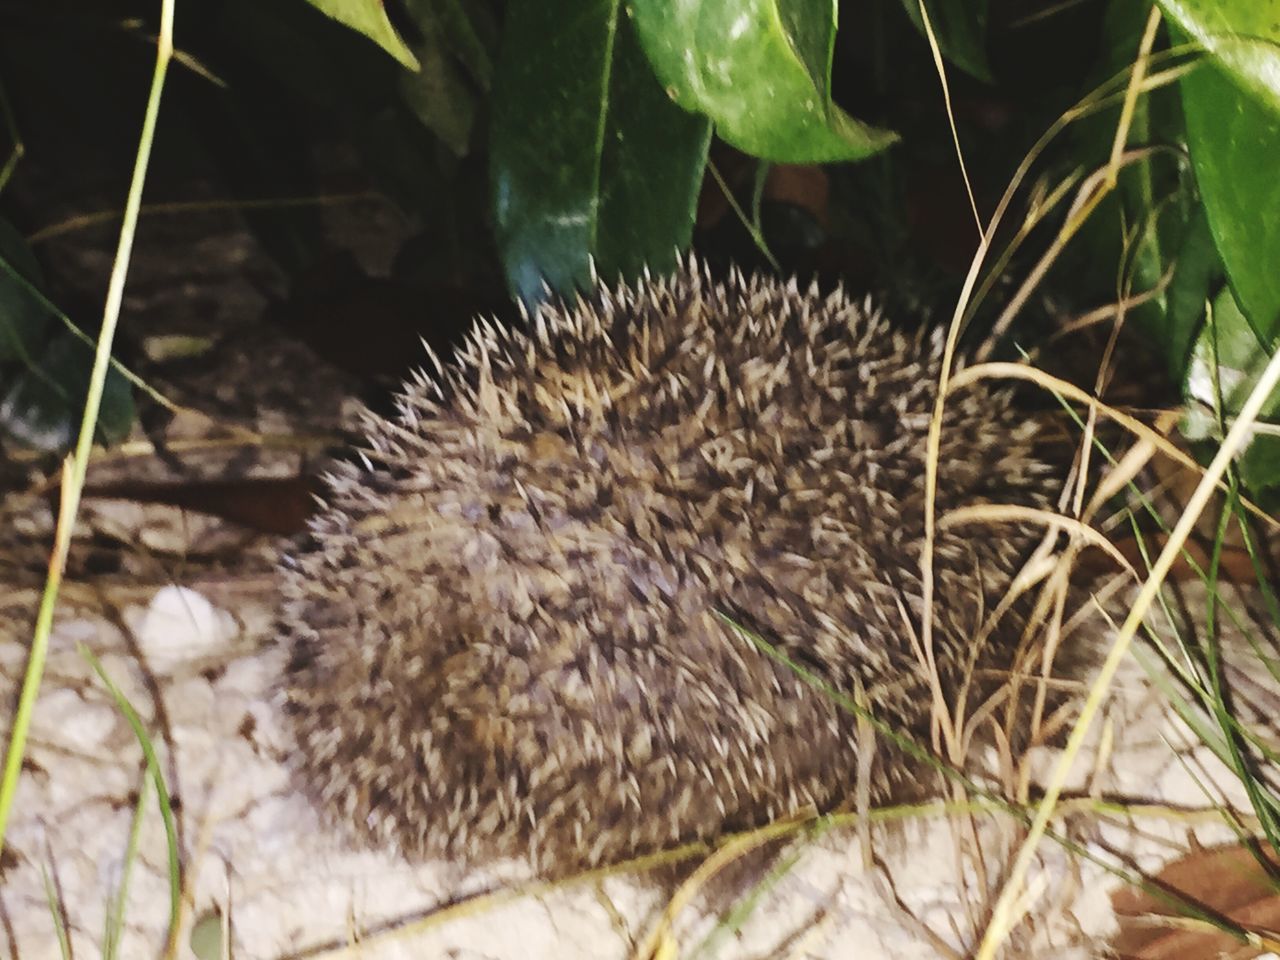 hedgehog, spiked, thorn, nature, close-up, outdoors, day, growth, no people, animal themes, mammal